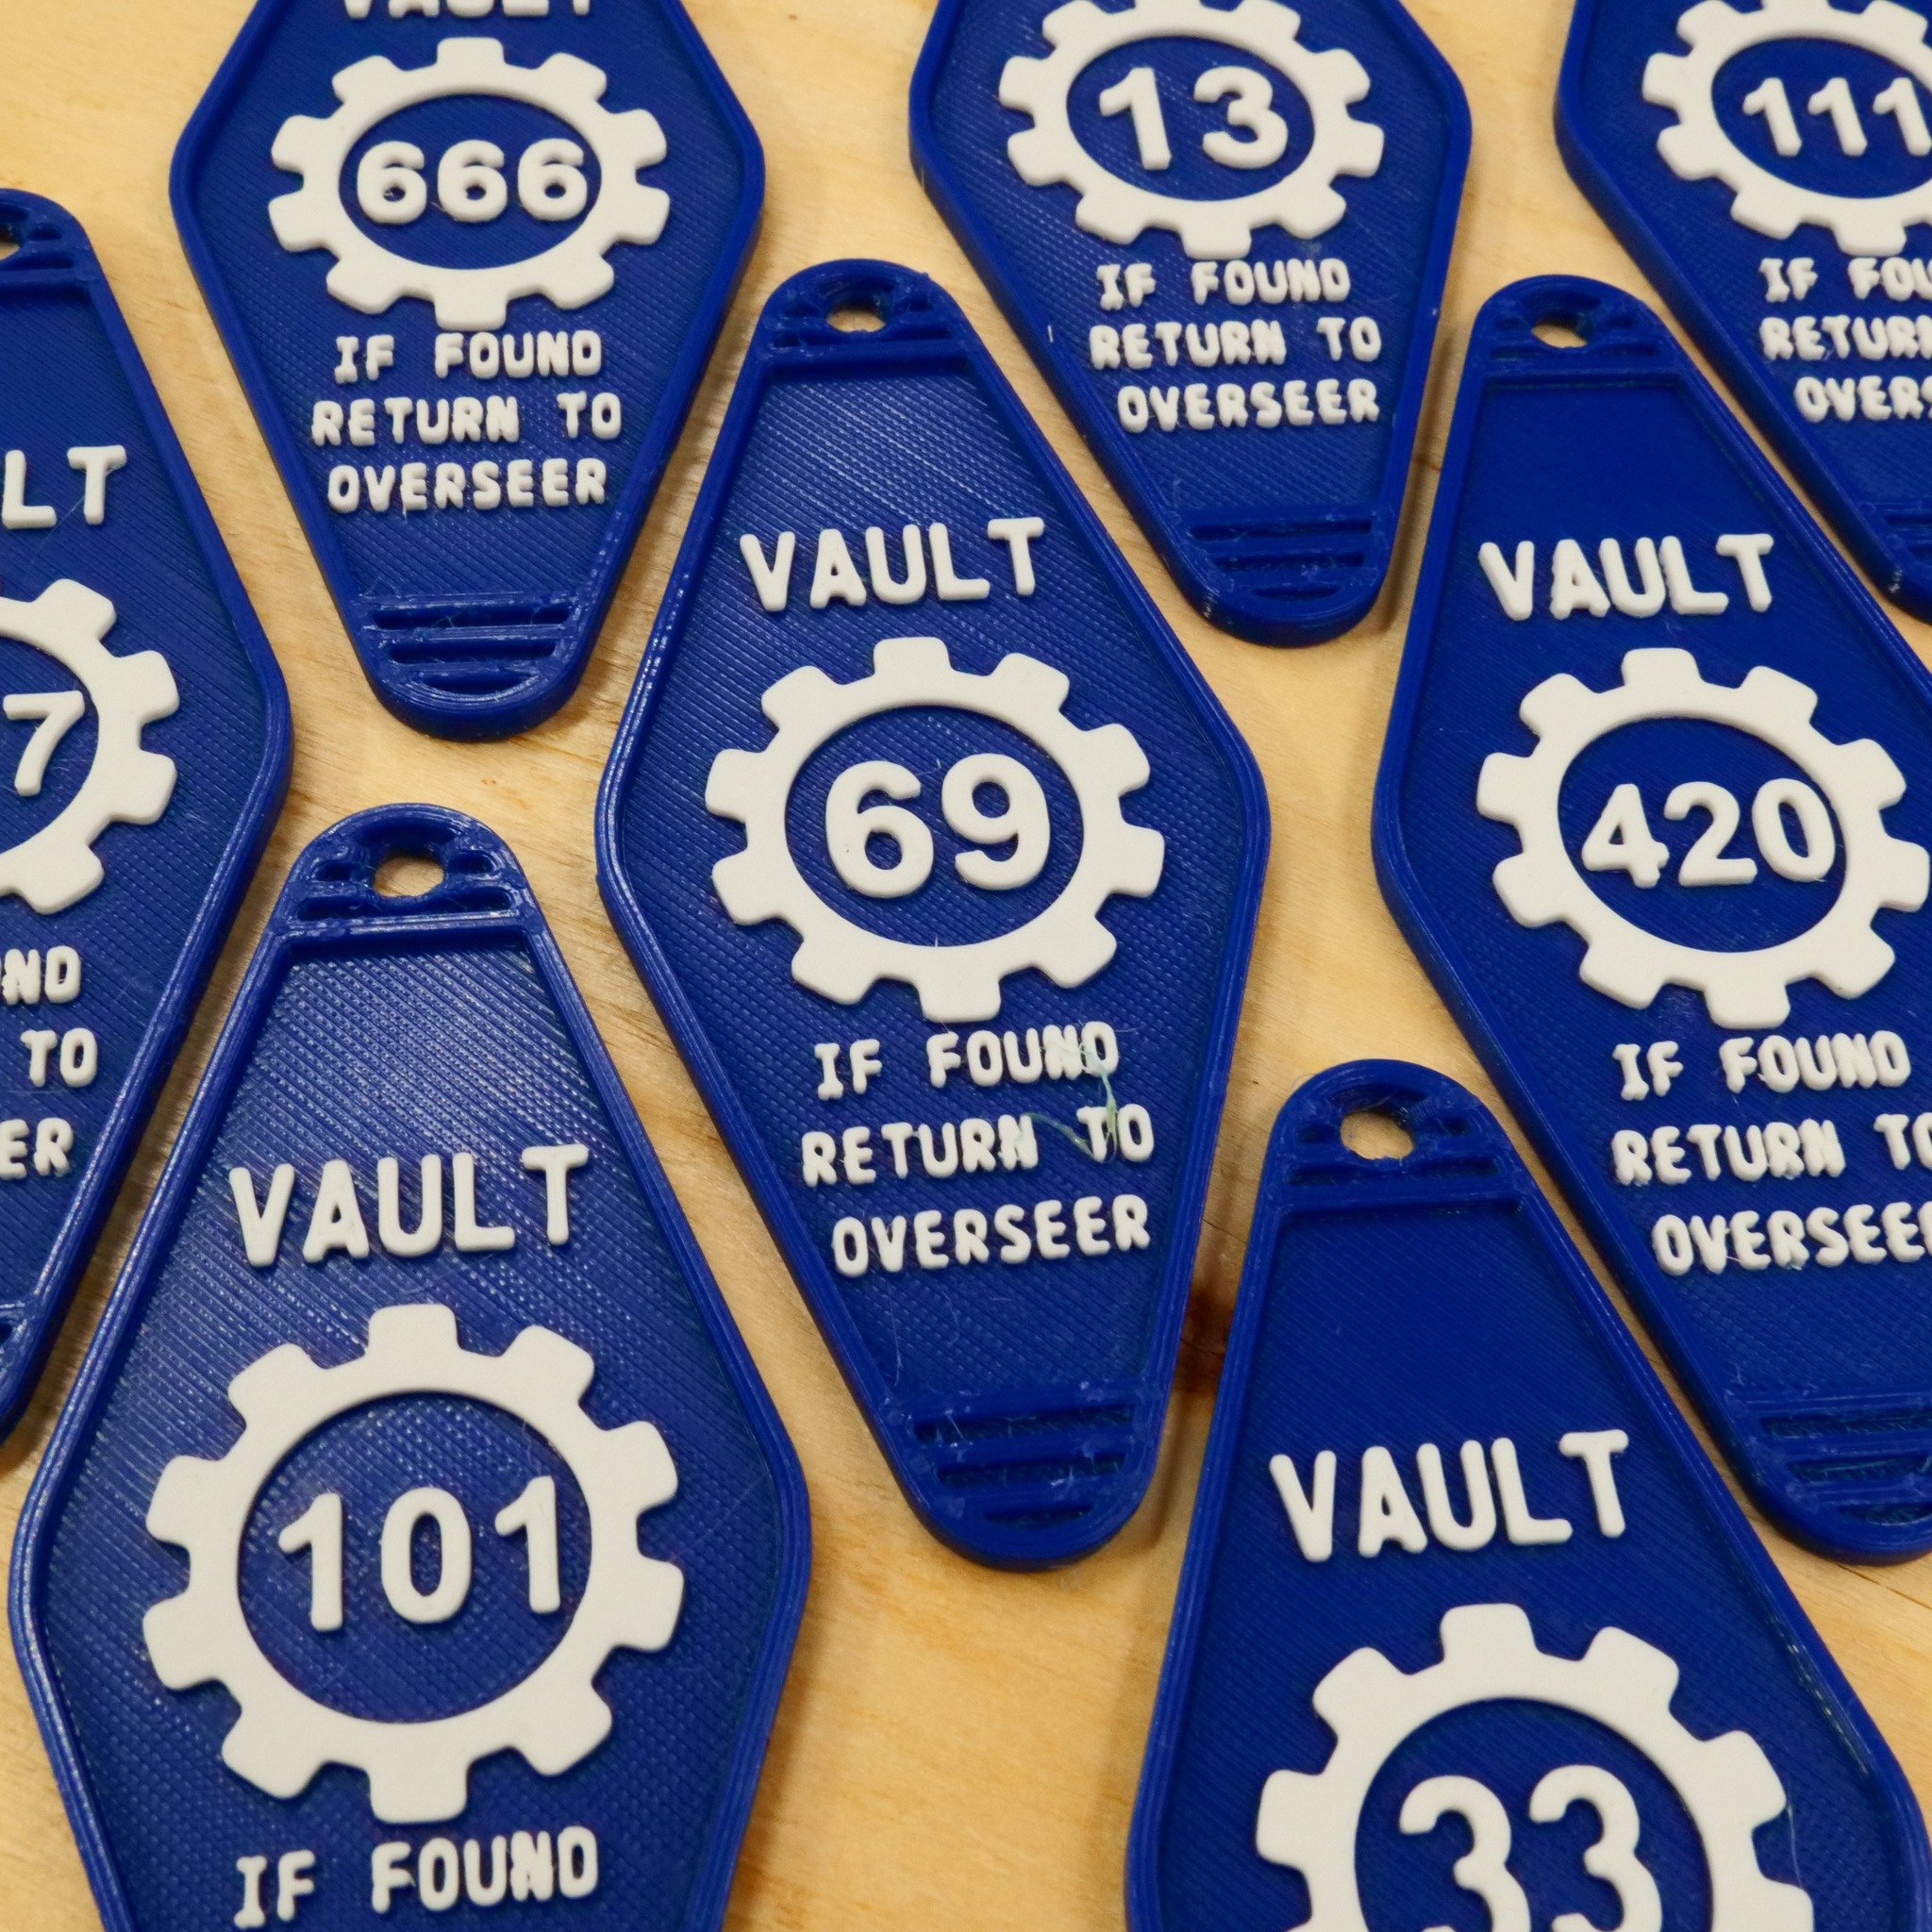 Do you Vault?
Check out these @Fallout inspired key fobs. 

This assortment of fobs are free on @Thangs3D maybe someone at @rmrrf can print one out with idle printer time since I can't be there! 😥

https://than.gs/m/1052989?affiliateCode=MAKERSMASHU